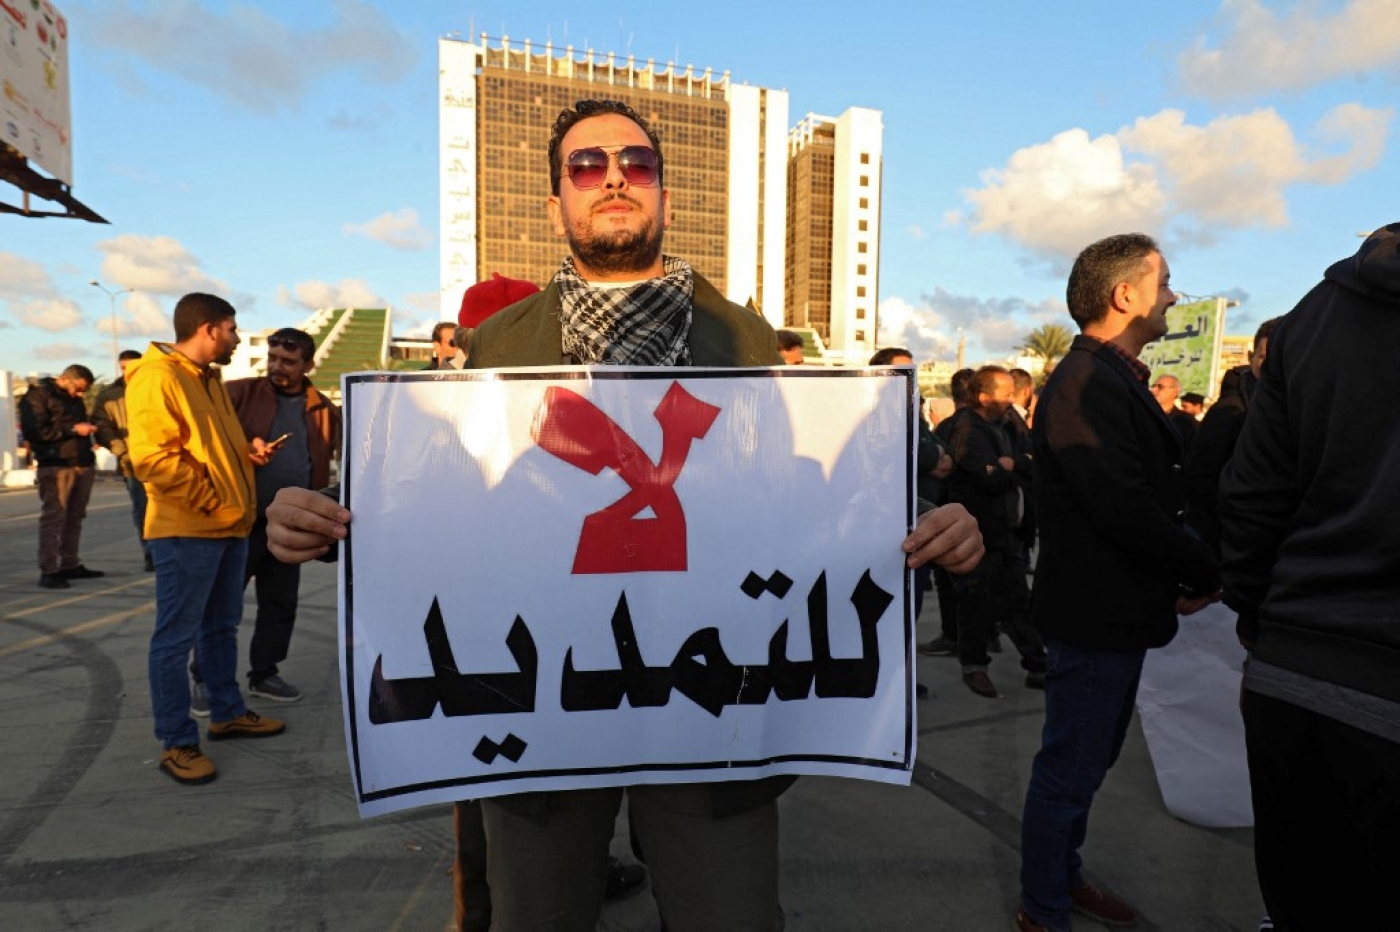 Libyans demonstrate against the postponement of elections, in the city of Benghazi on 24 December 2021 (AFP)